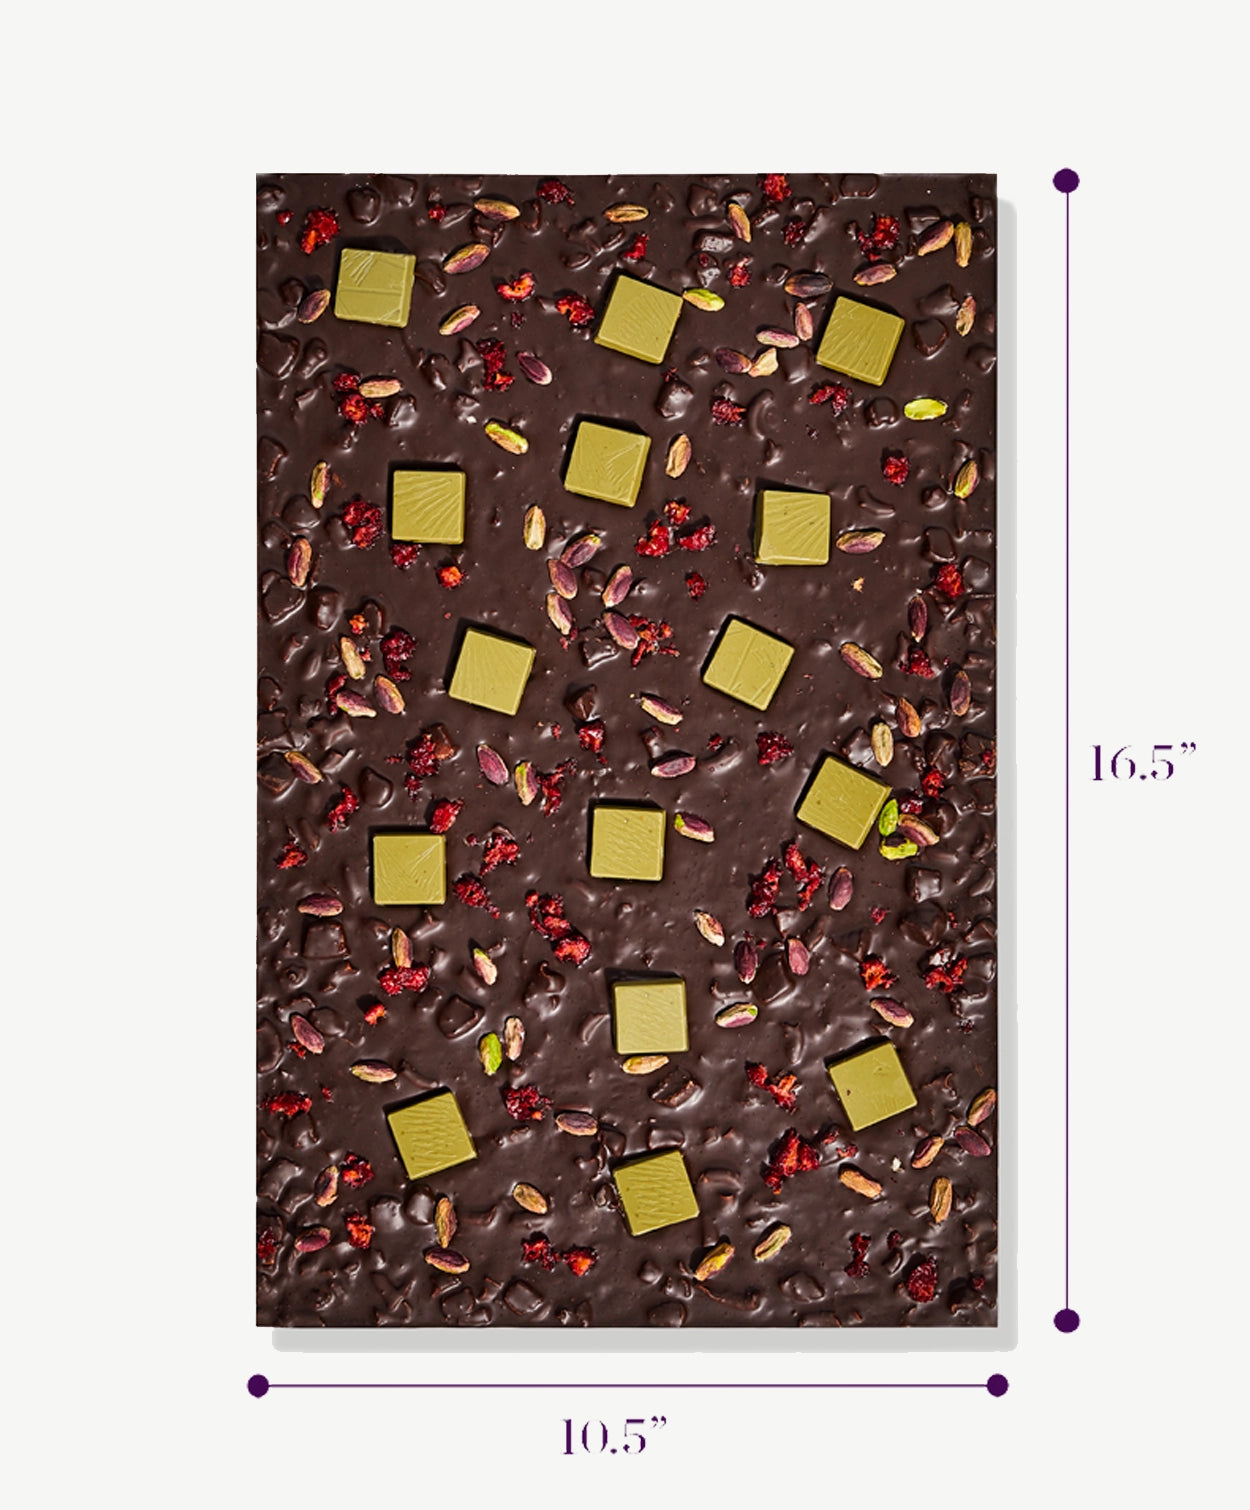 A large 2 lb slab of chocolate covered in pretzel pieces and toffee sitting on a white background with dimensions displaying it's size.